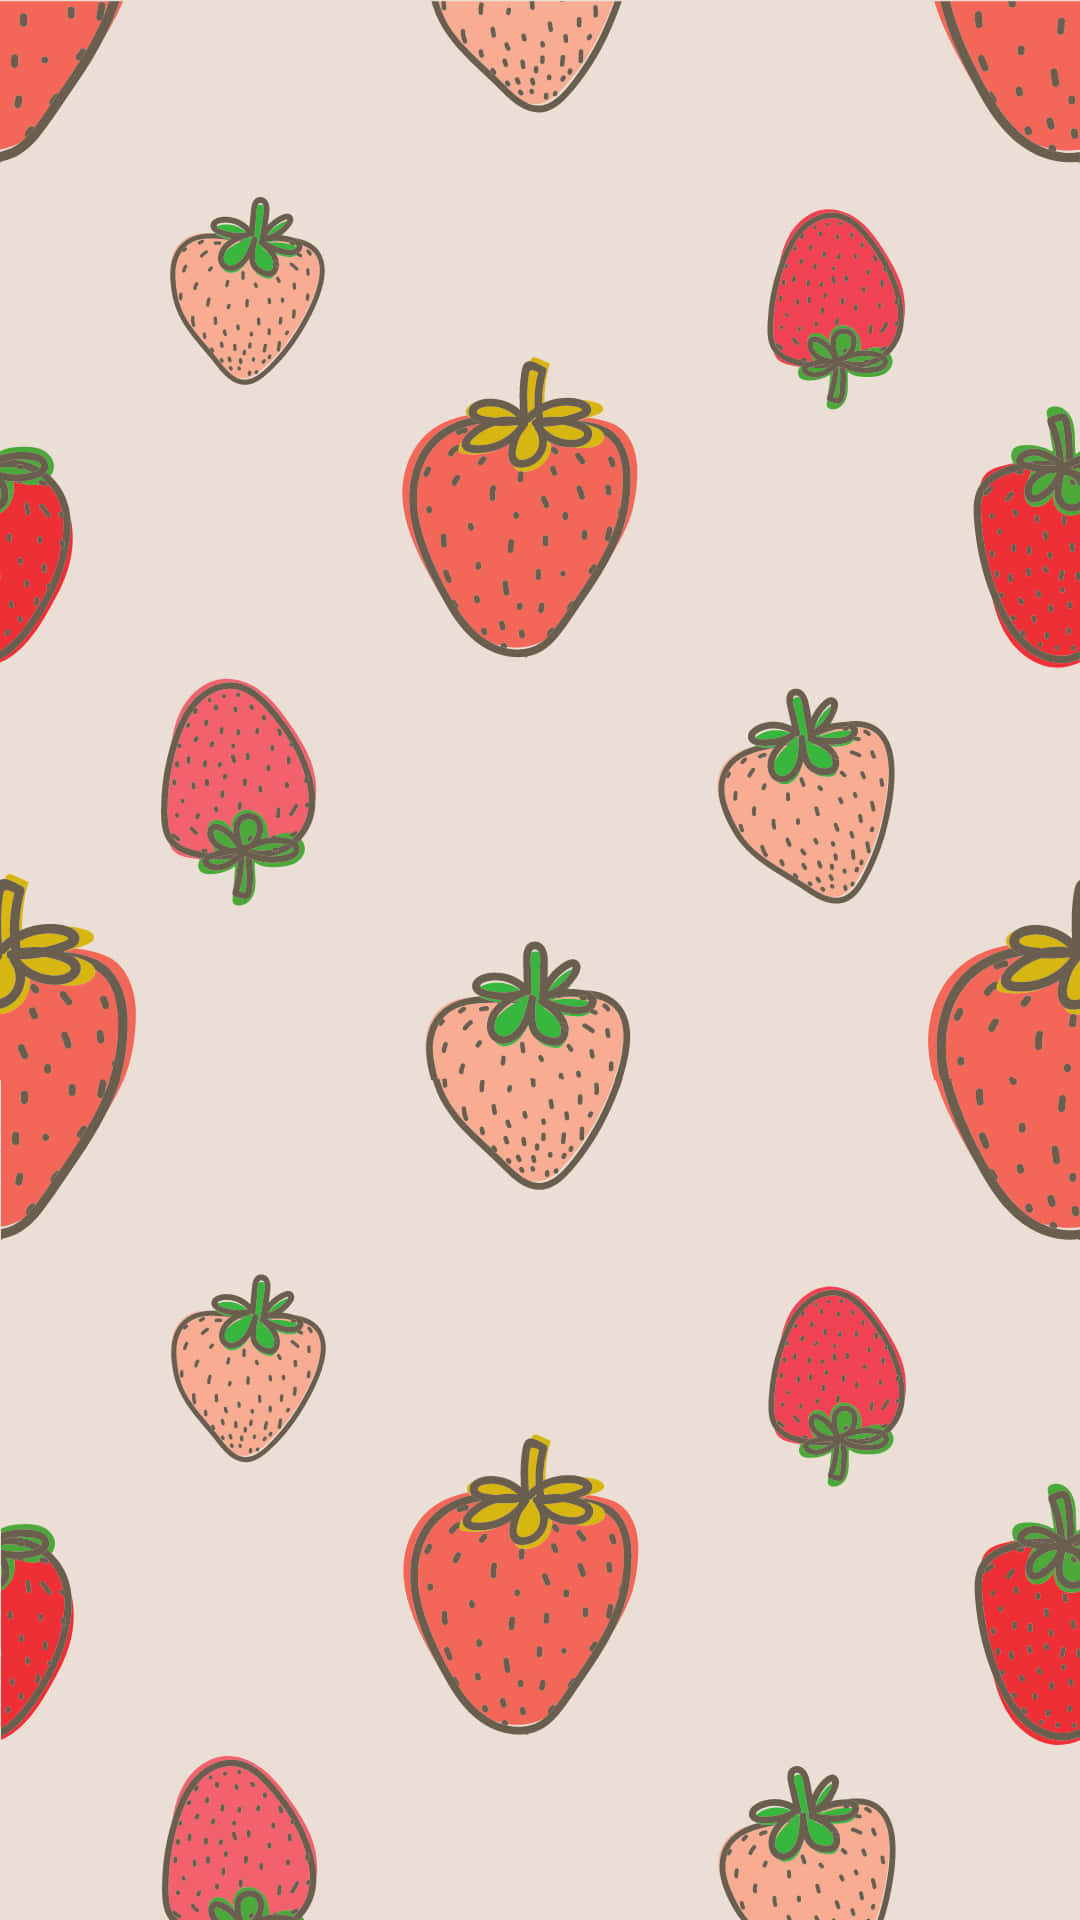 Wallpaper Strawberry Berry Strawberry Juice Fruit Cake Background   Download Free Image